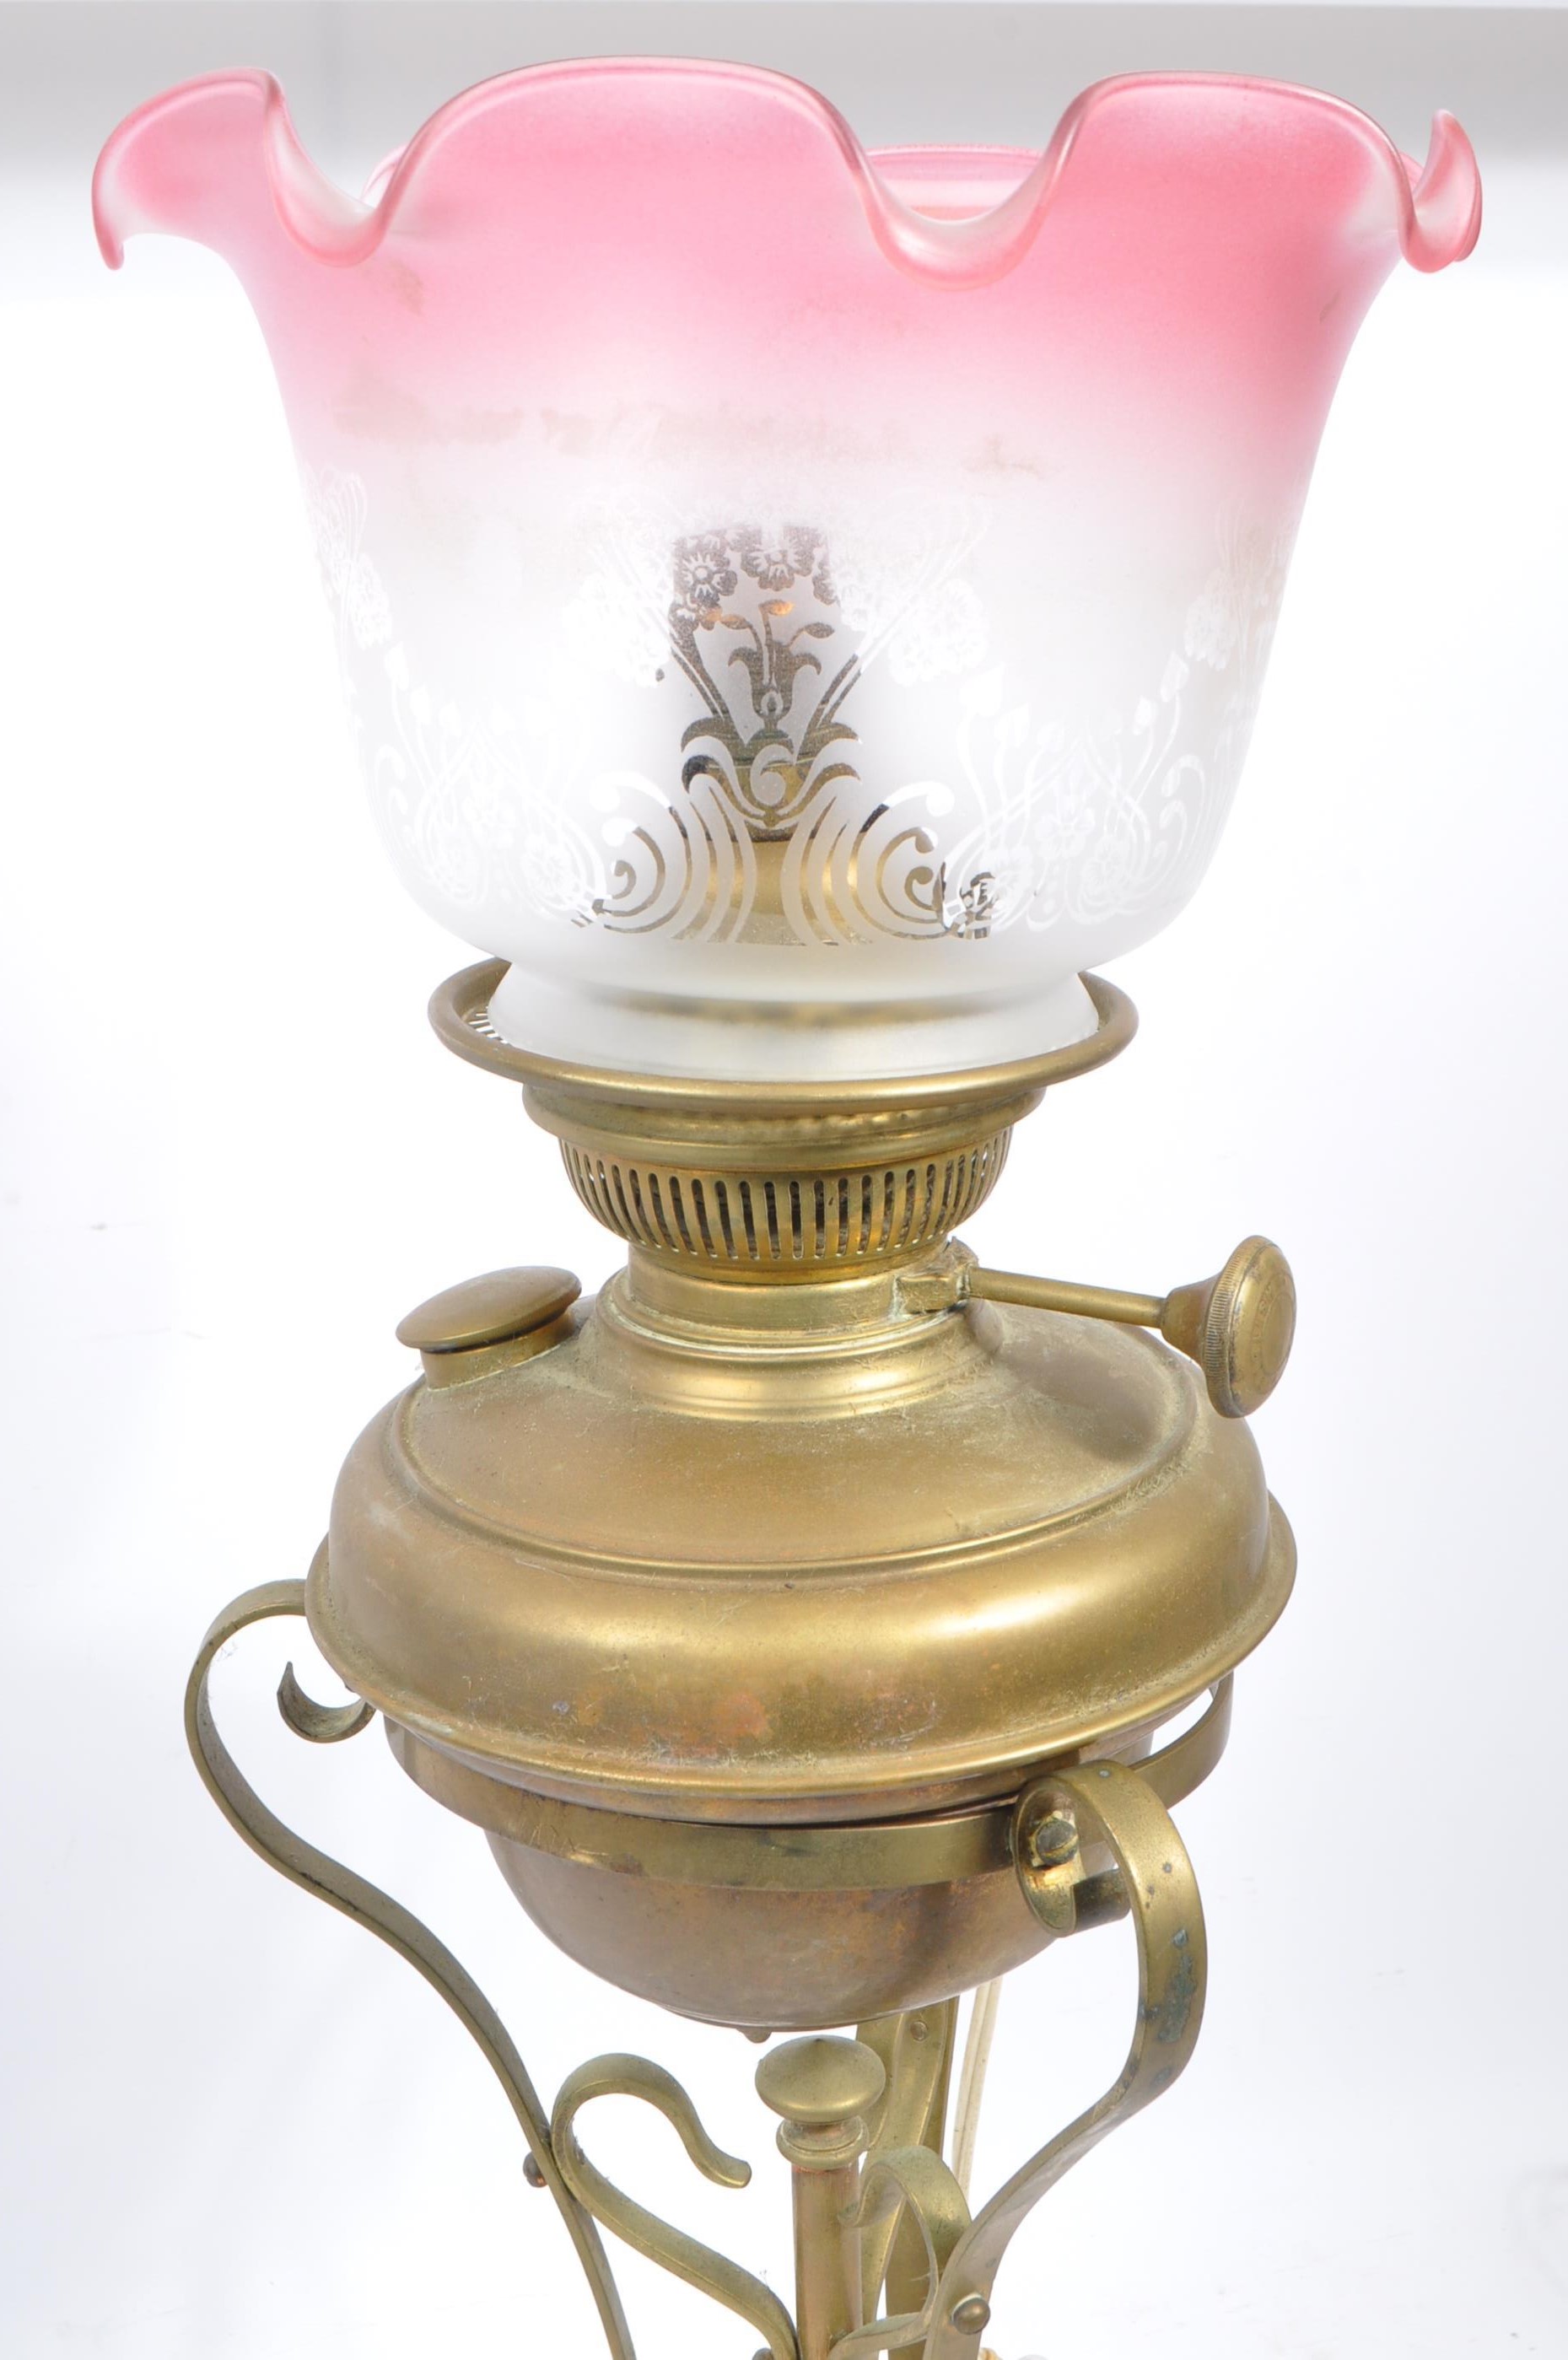 ART NOUVEAU MANNER CONVERTED OIL LAMP WITH PINK SHADE - Image 2 of 5